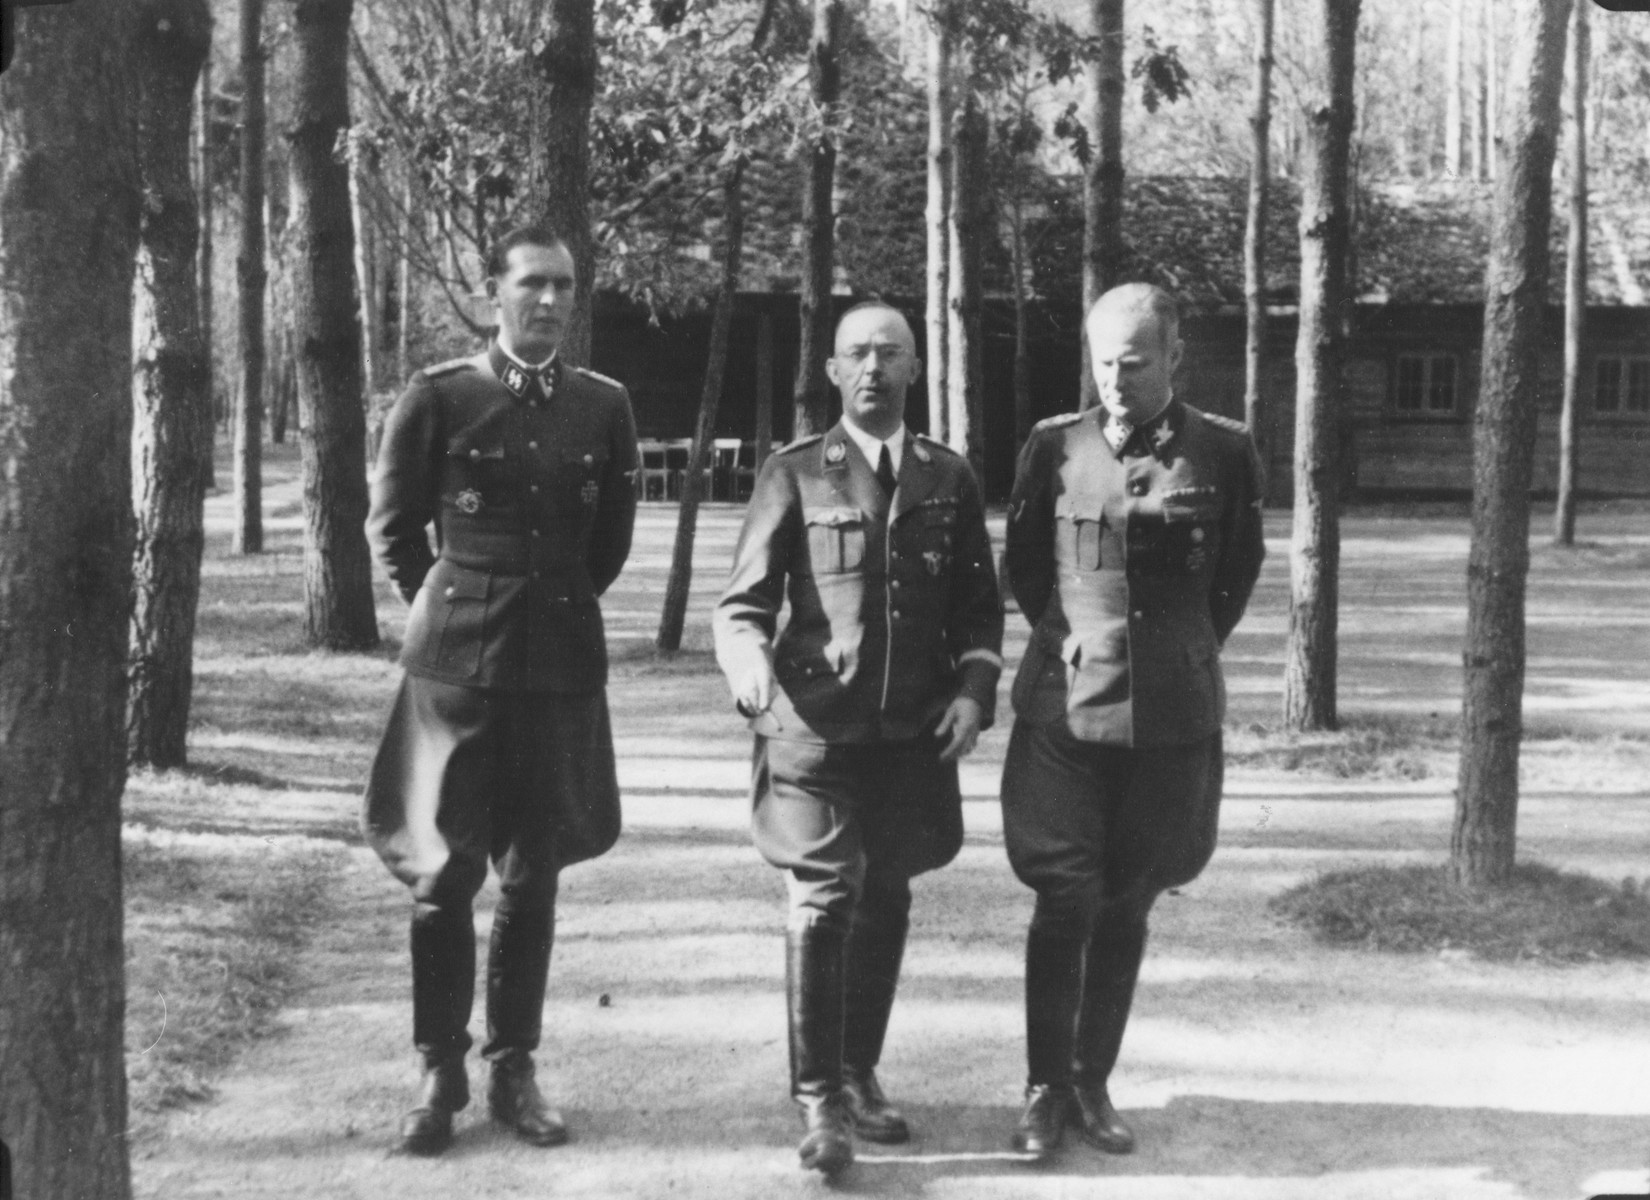 Reichsfuehrer-SS Heinrich Himmler strolls with two other SS officials [probably at Wolfsschanze (Wolf's Lair), Hitler's field headquarters in Rastenburg, East Prussia]. 

Pictured from left to right are: Richard Schulze-Kossens, Himmler and Karl Wolff.